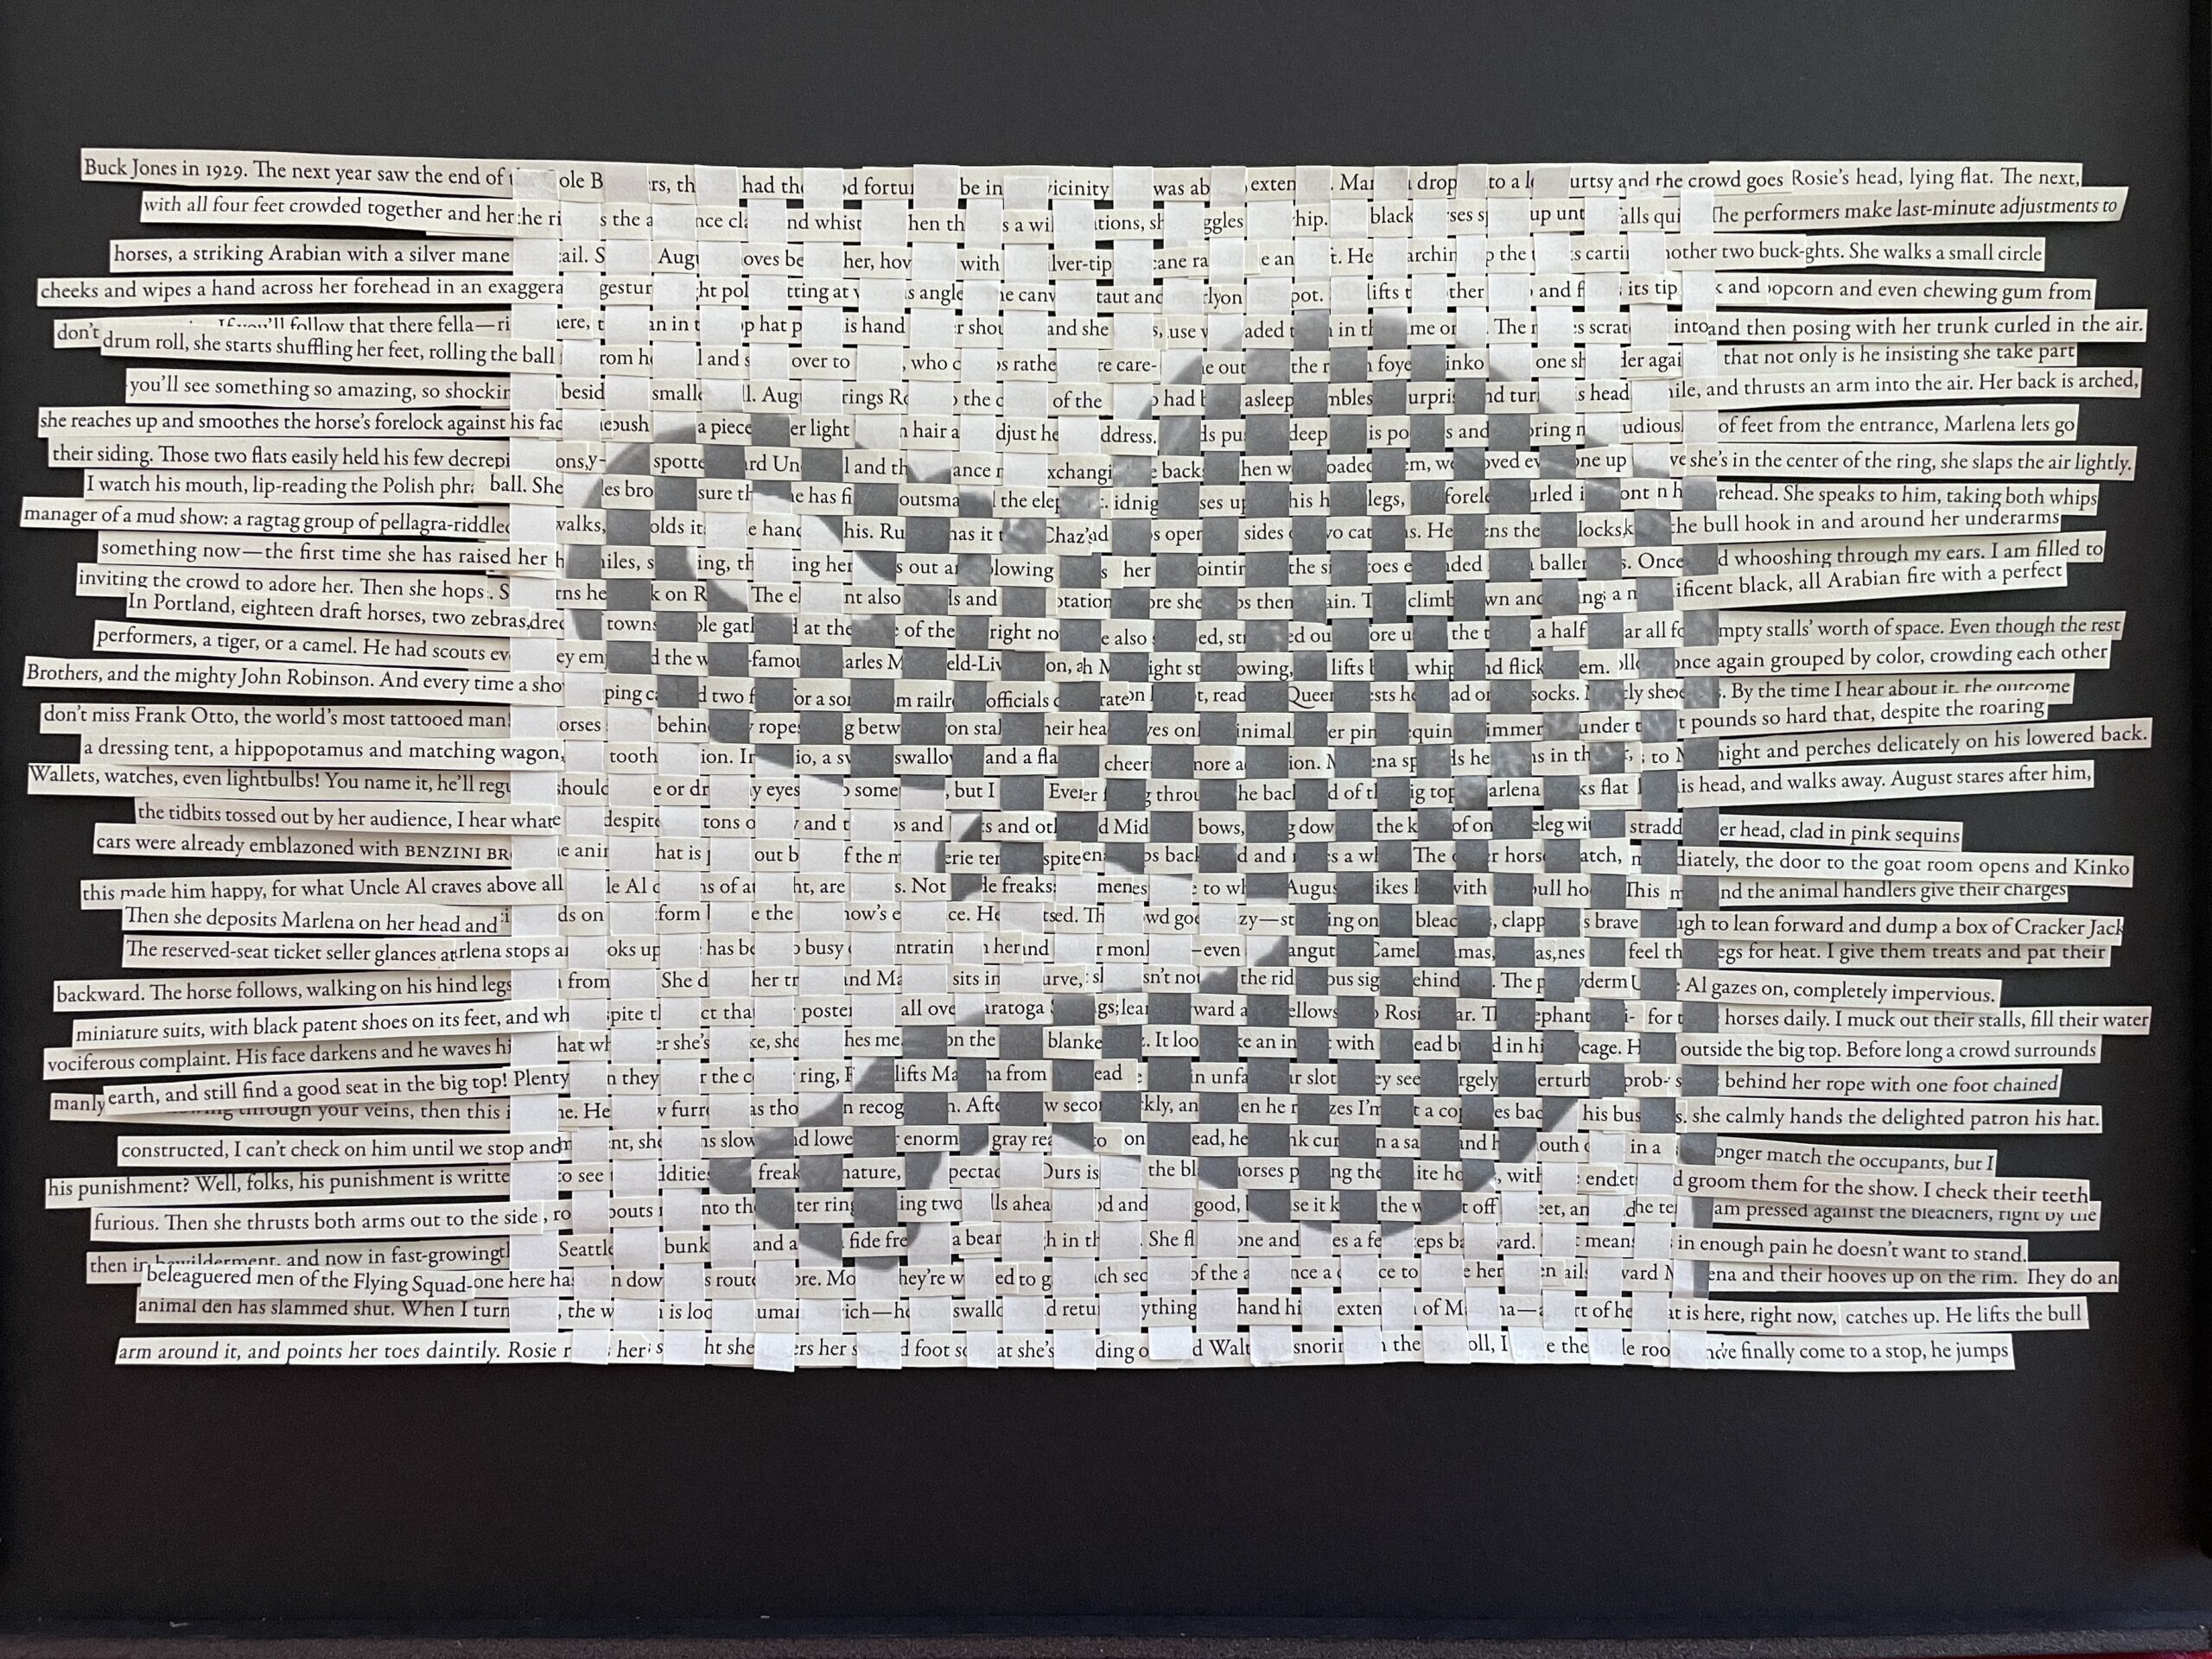 An artwork by Maggie Kerrigan that has text from the book Water for Elephants woven into an image of an elephant.